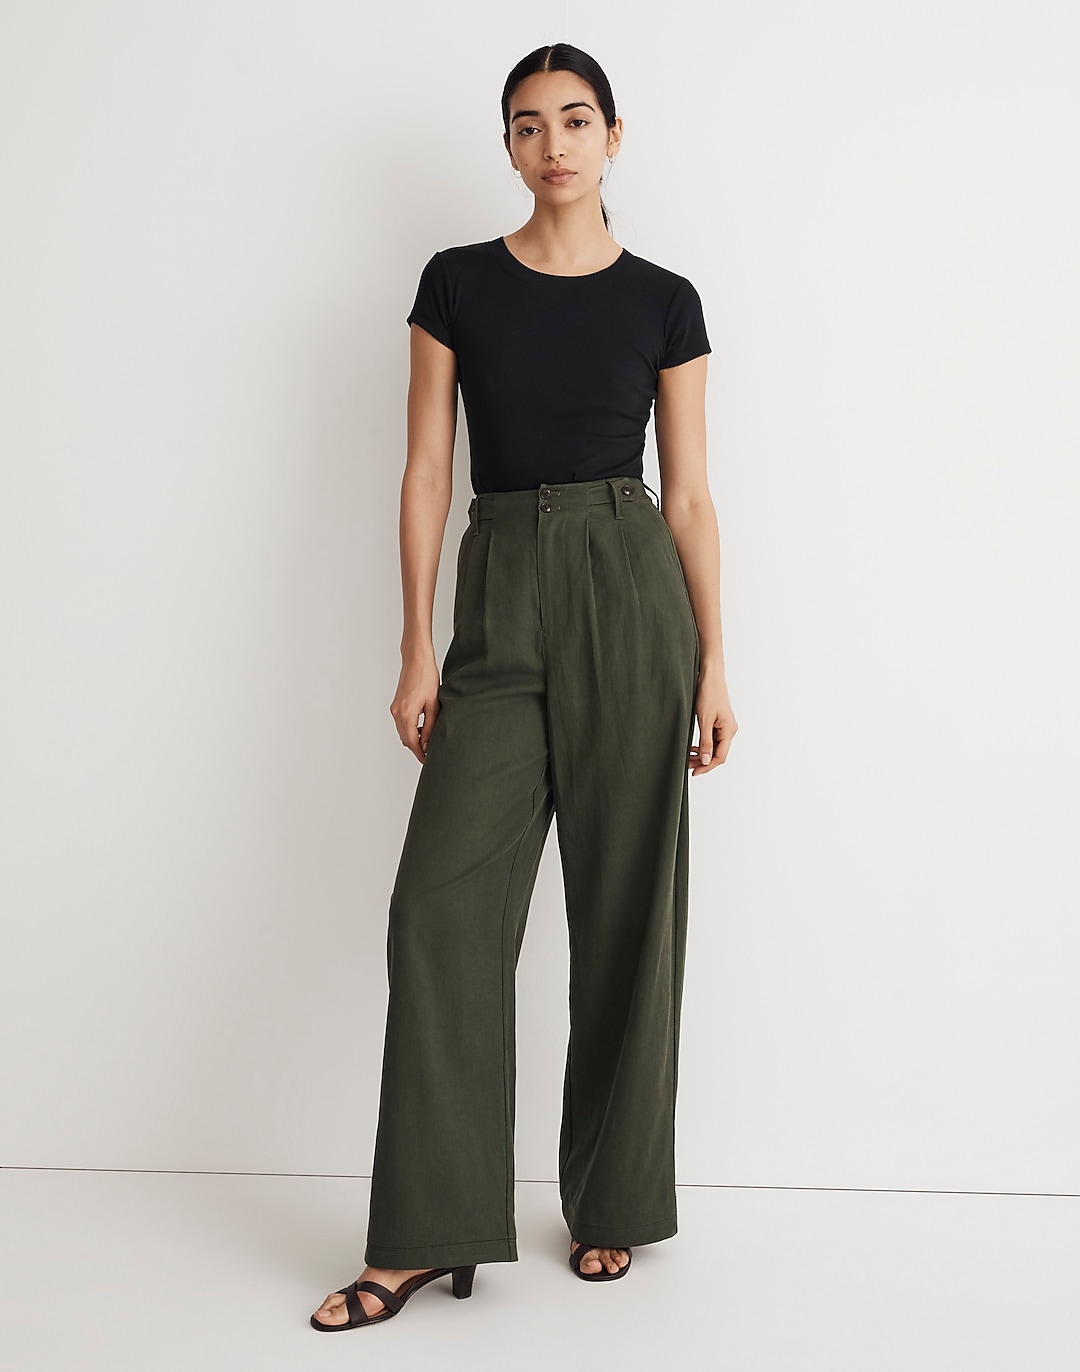 These Madewell Trousers Are the Only Real Pants I'll Wear While Traveling